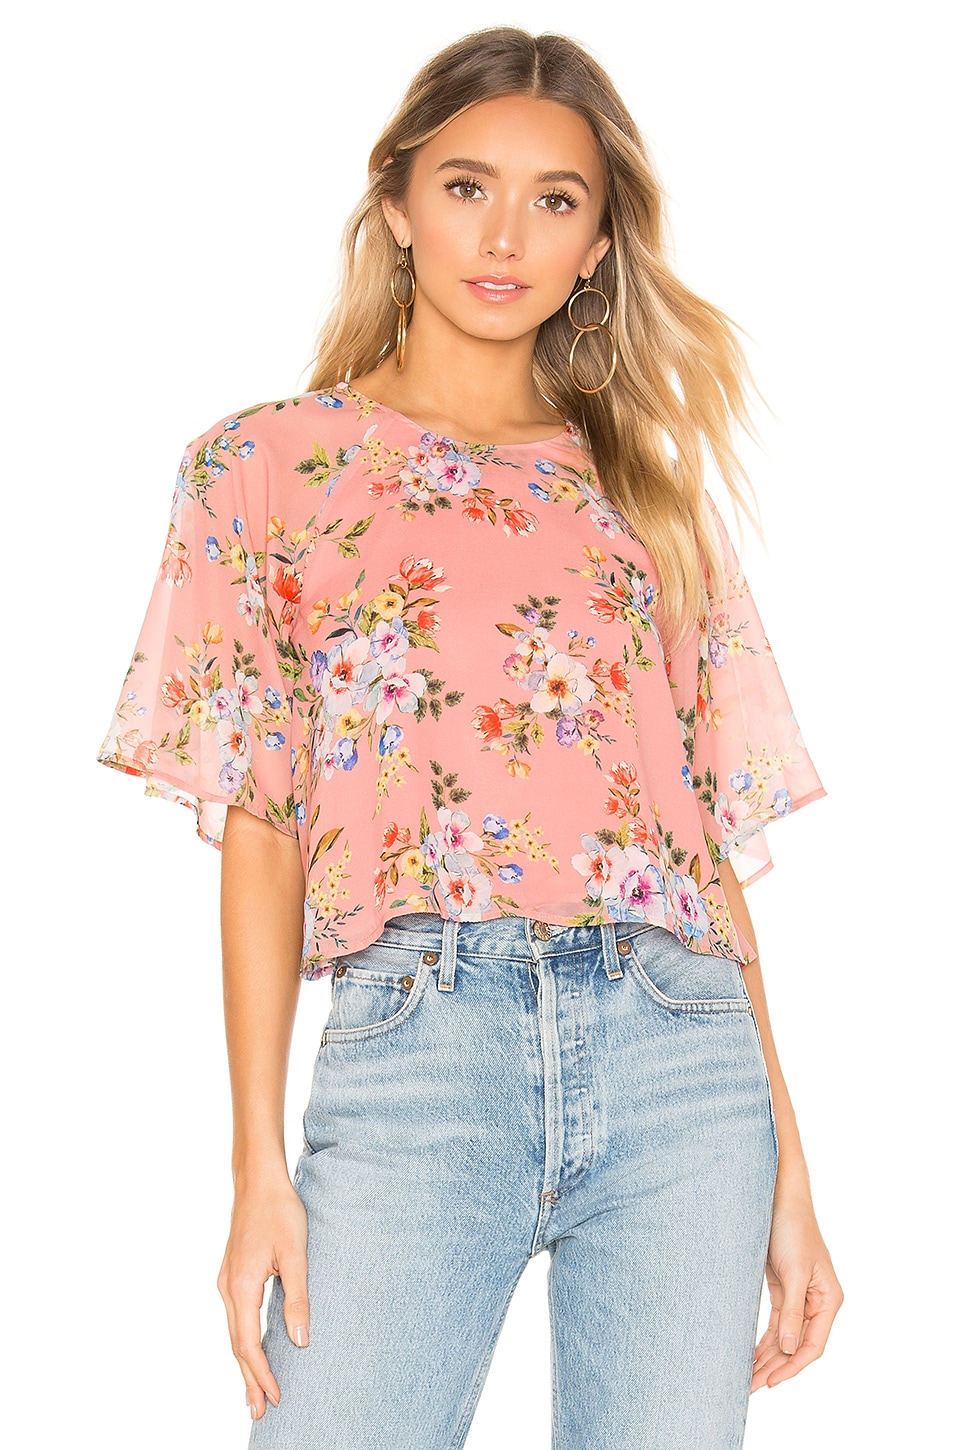 House of Harlow 1960 X REVOLVE Marloes Blouse in Rose Floral | REVOLVE